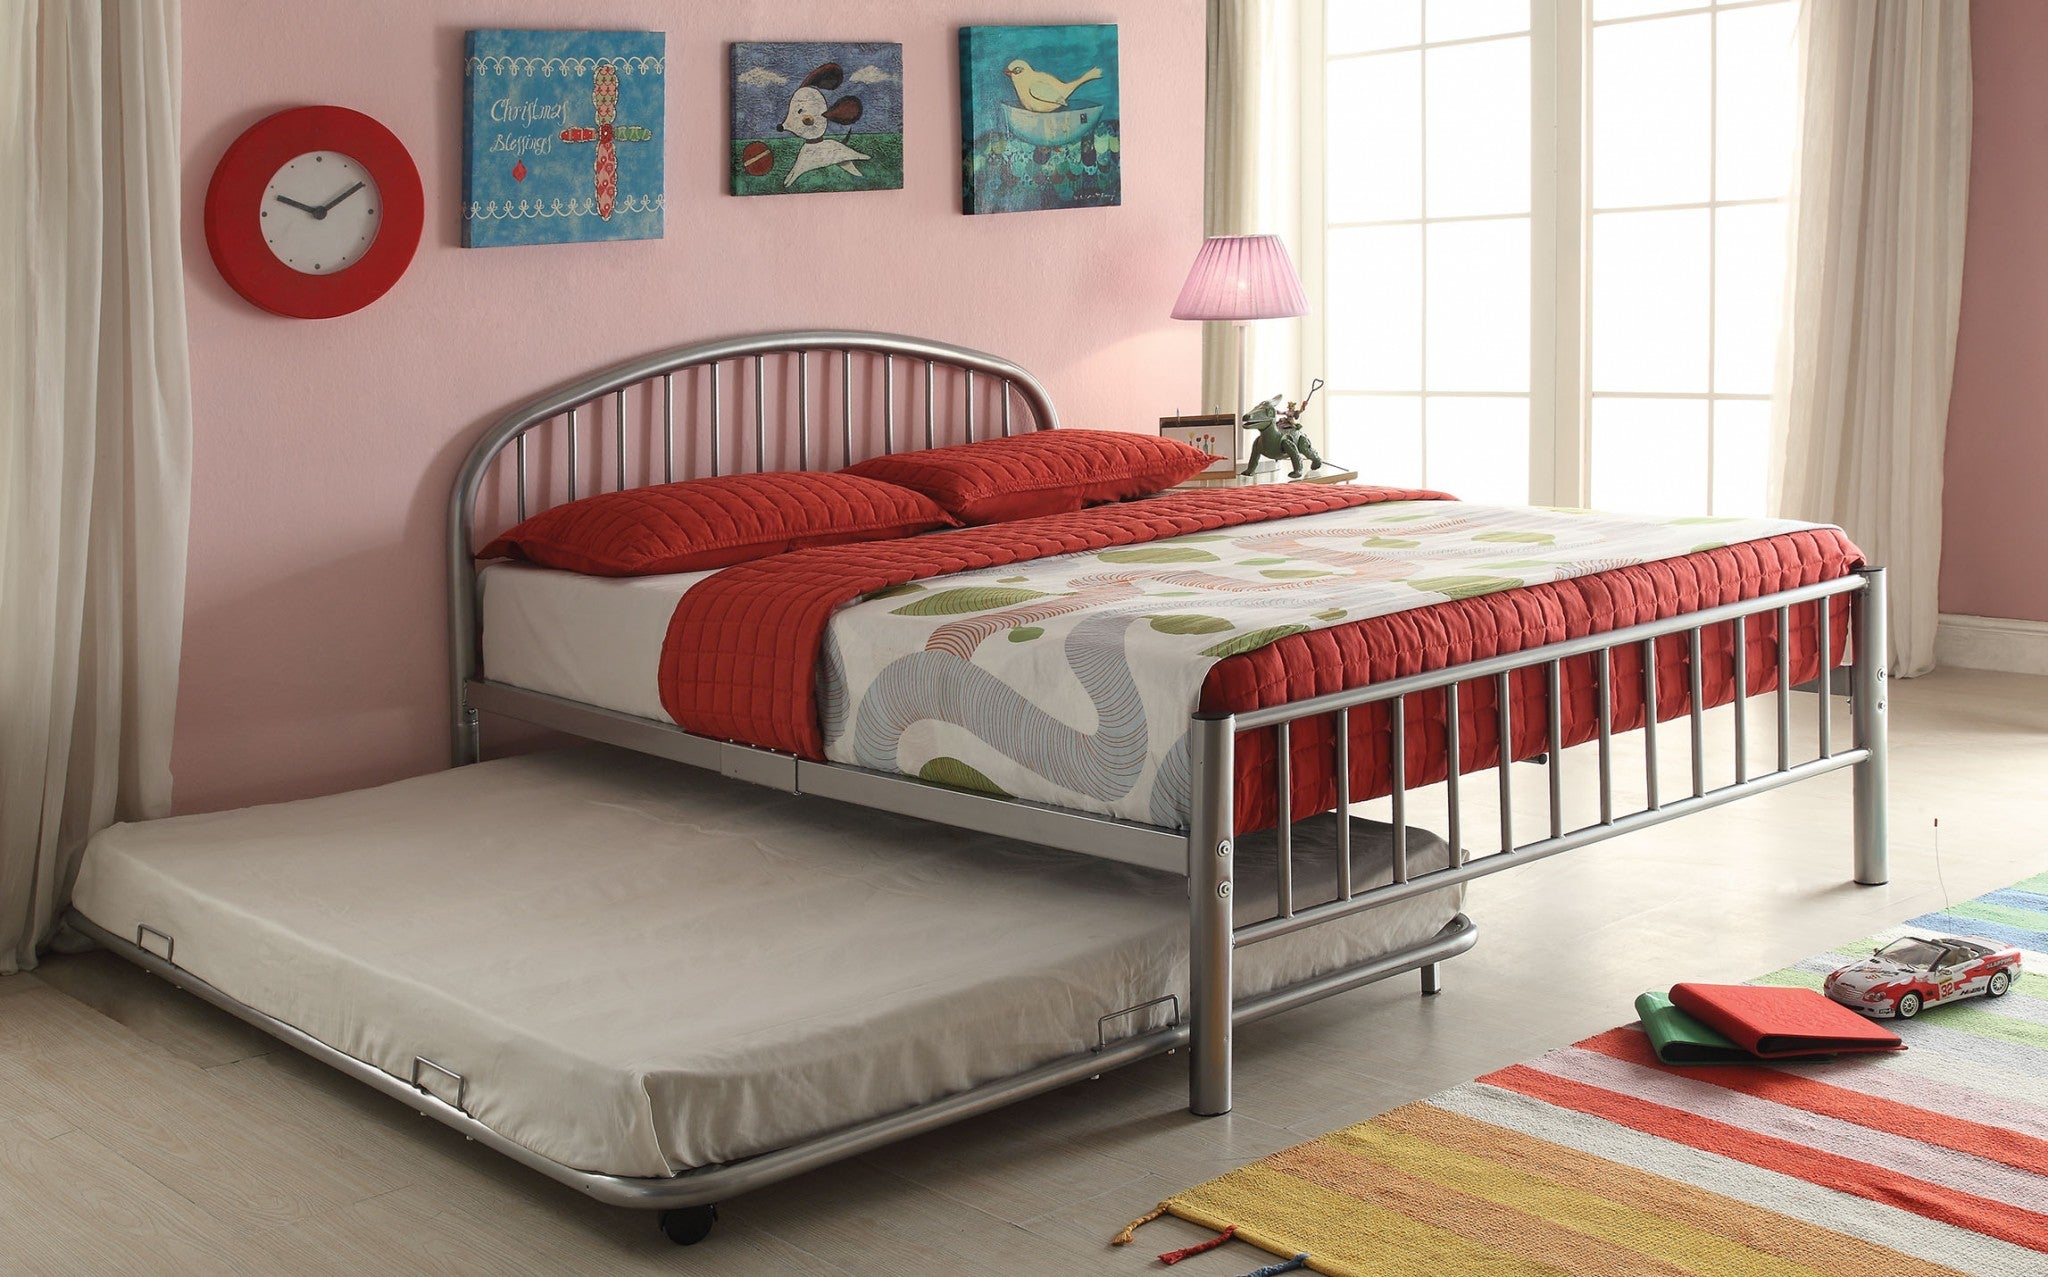 79" X 39" X 33" Twin Silver Bed Default Title